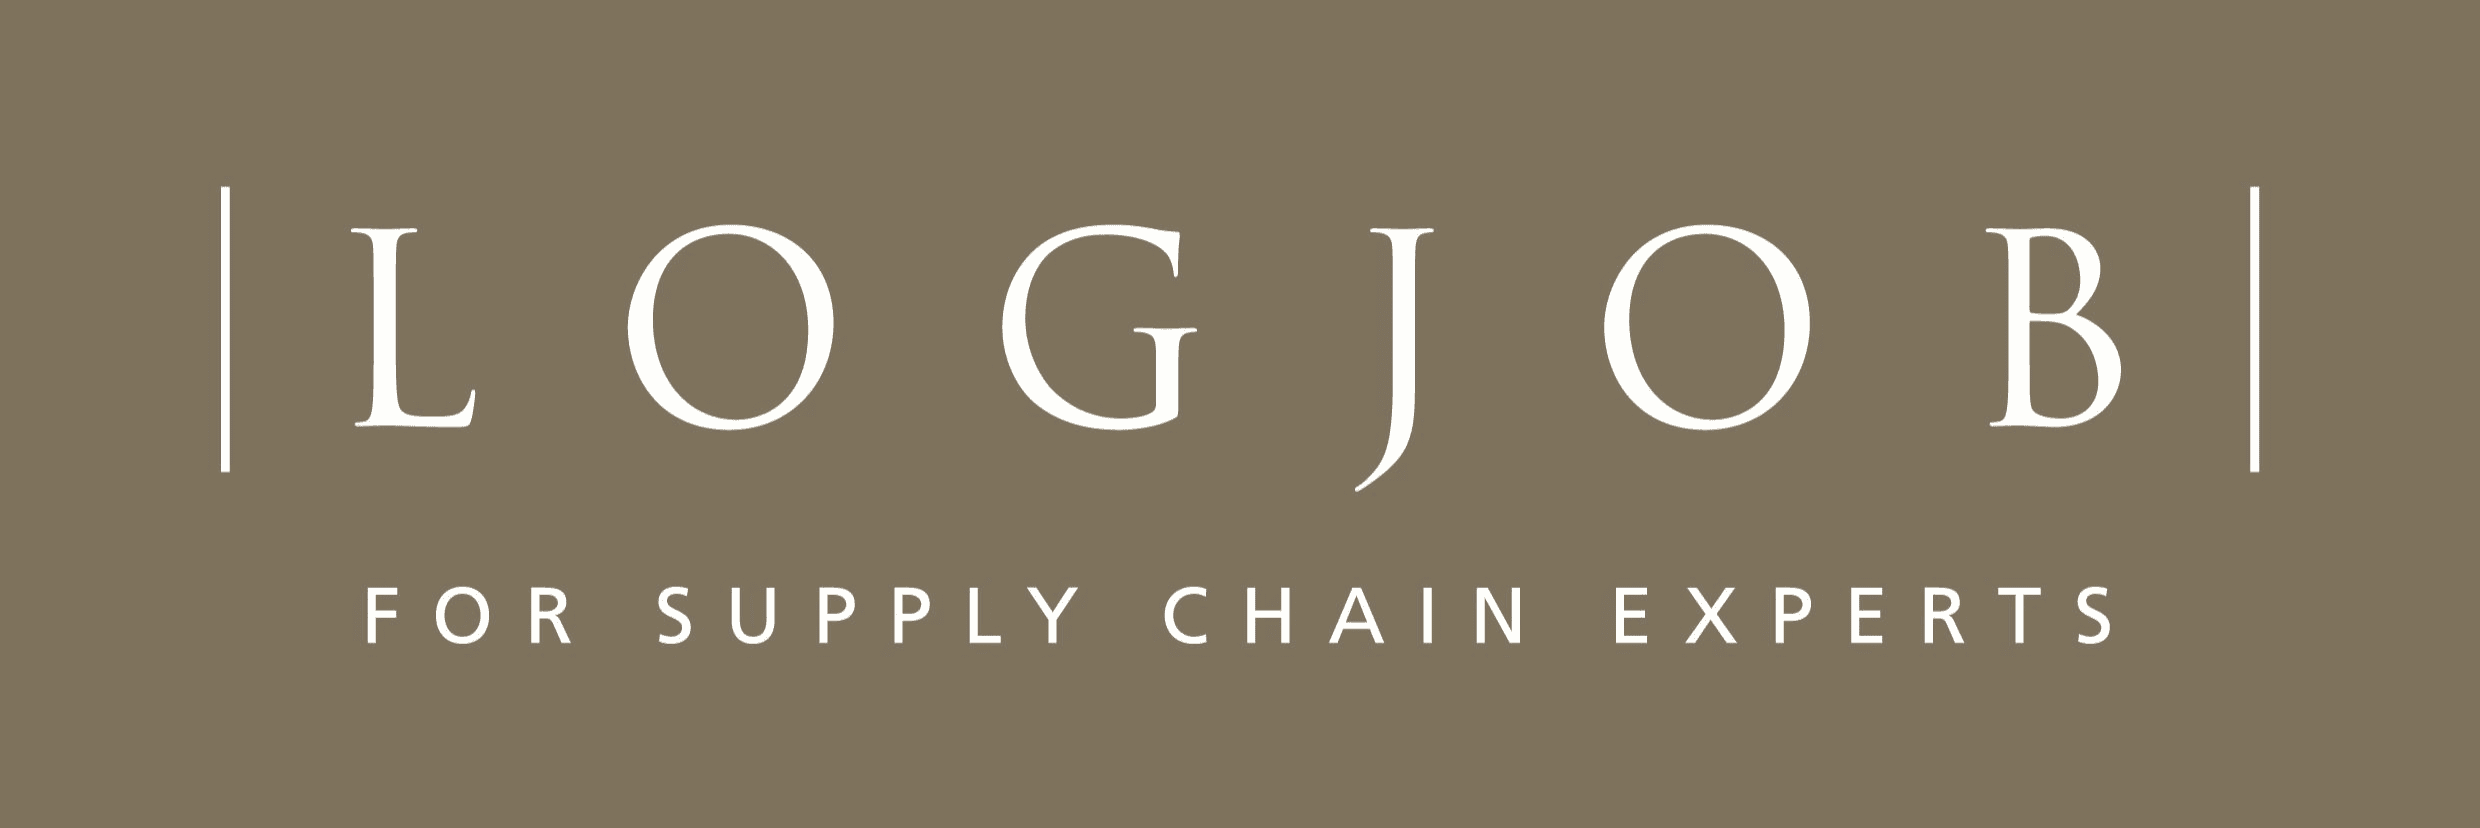 Logjob AG - For Supply Chain Experts.